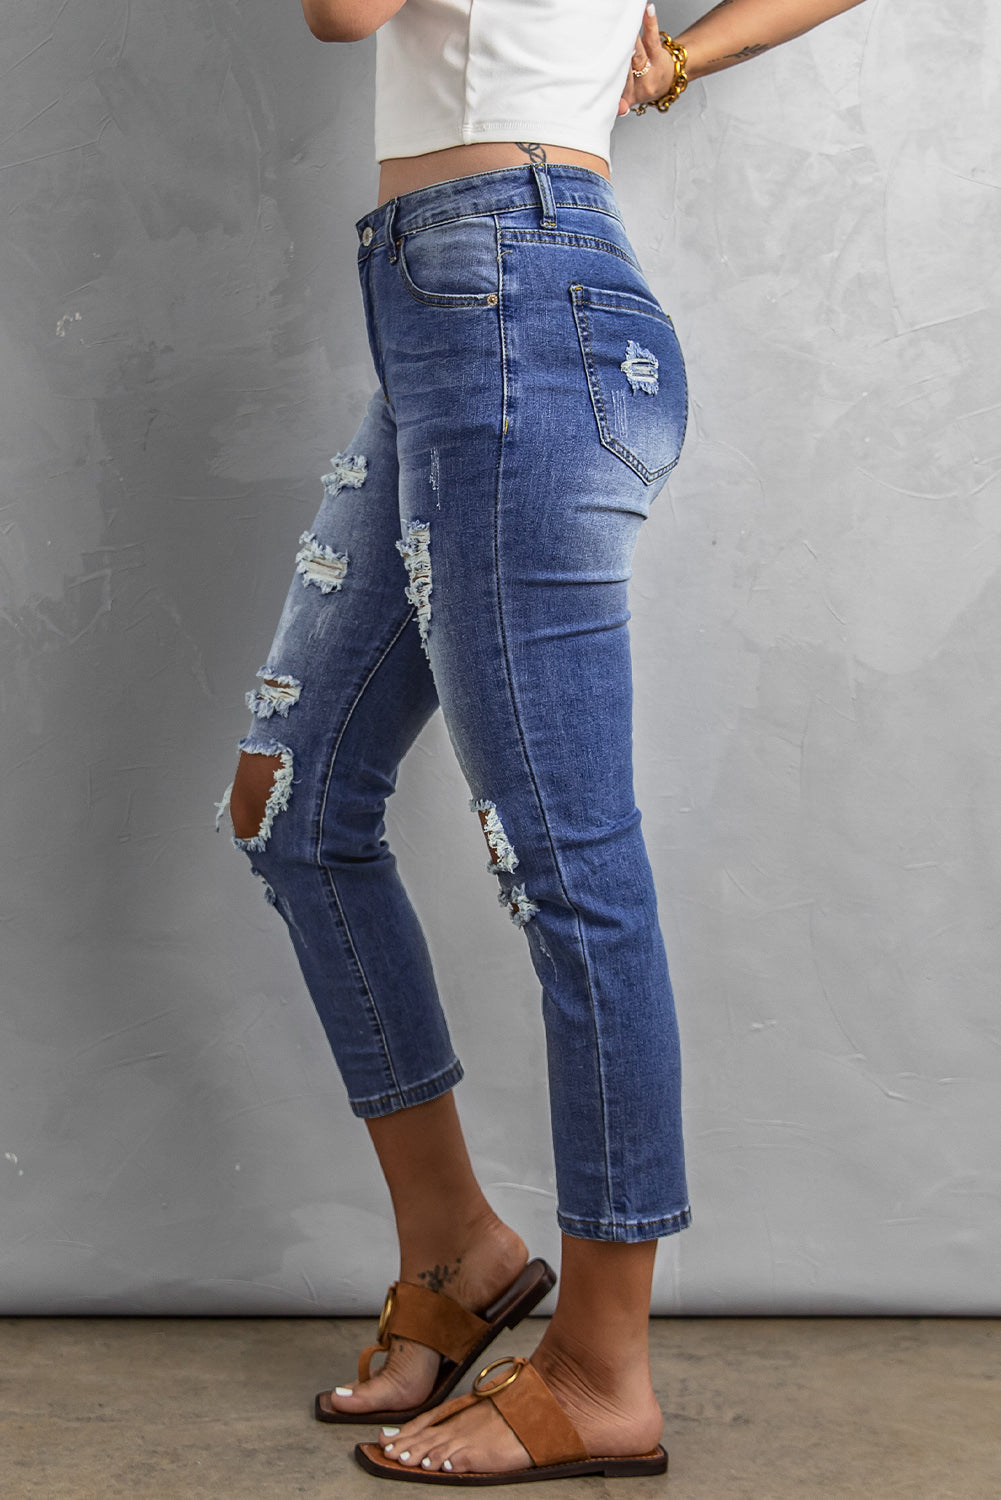 Women Fashion Blue Fading Distressed Holes Crop Jeans